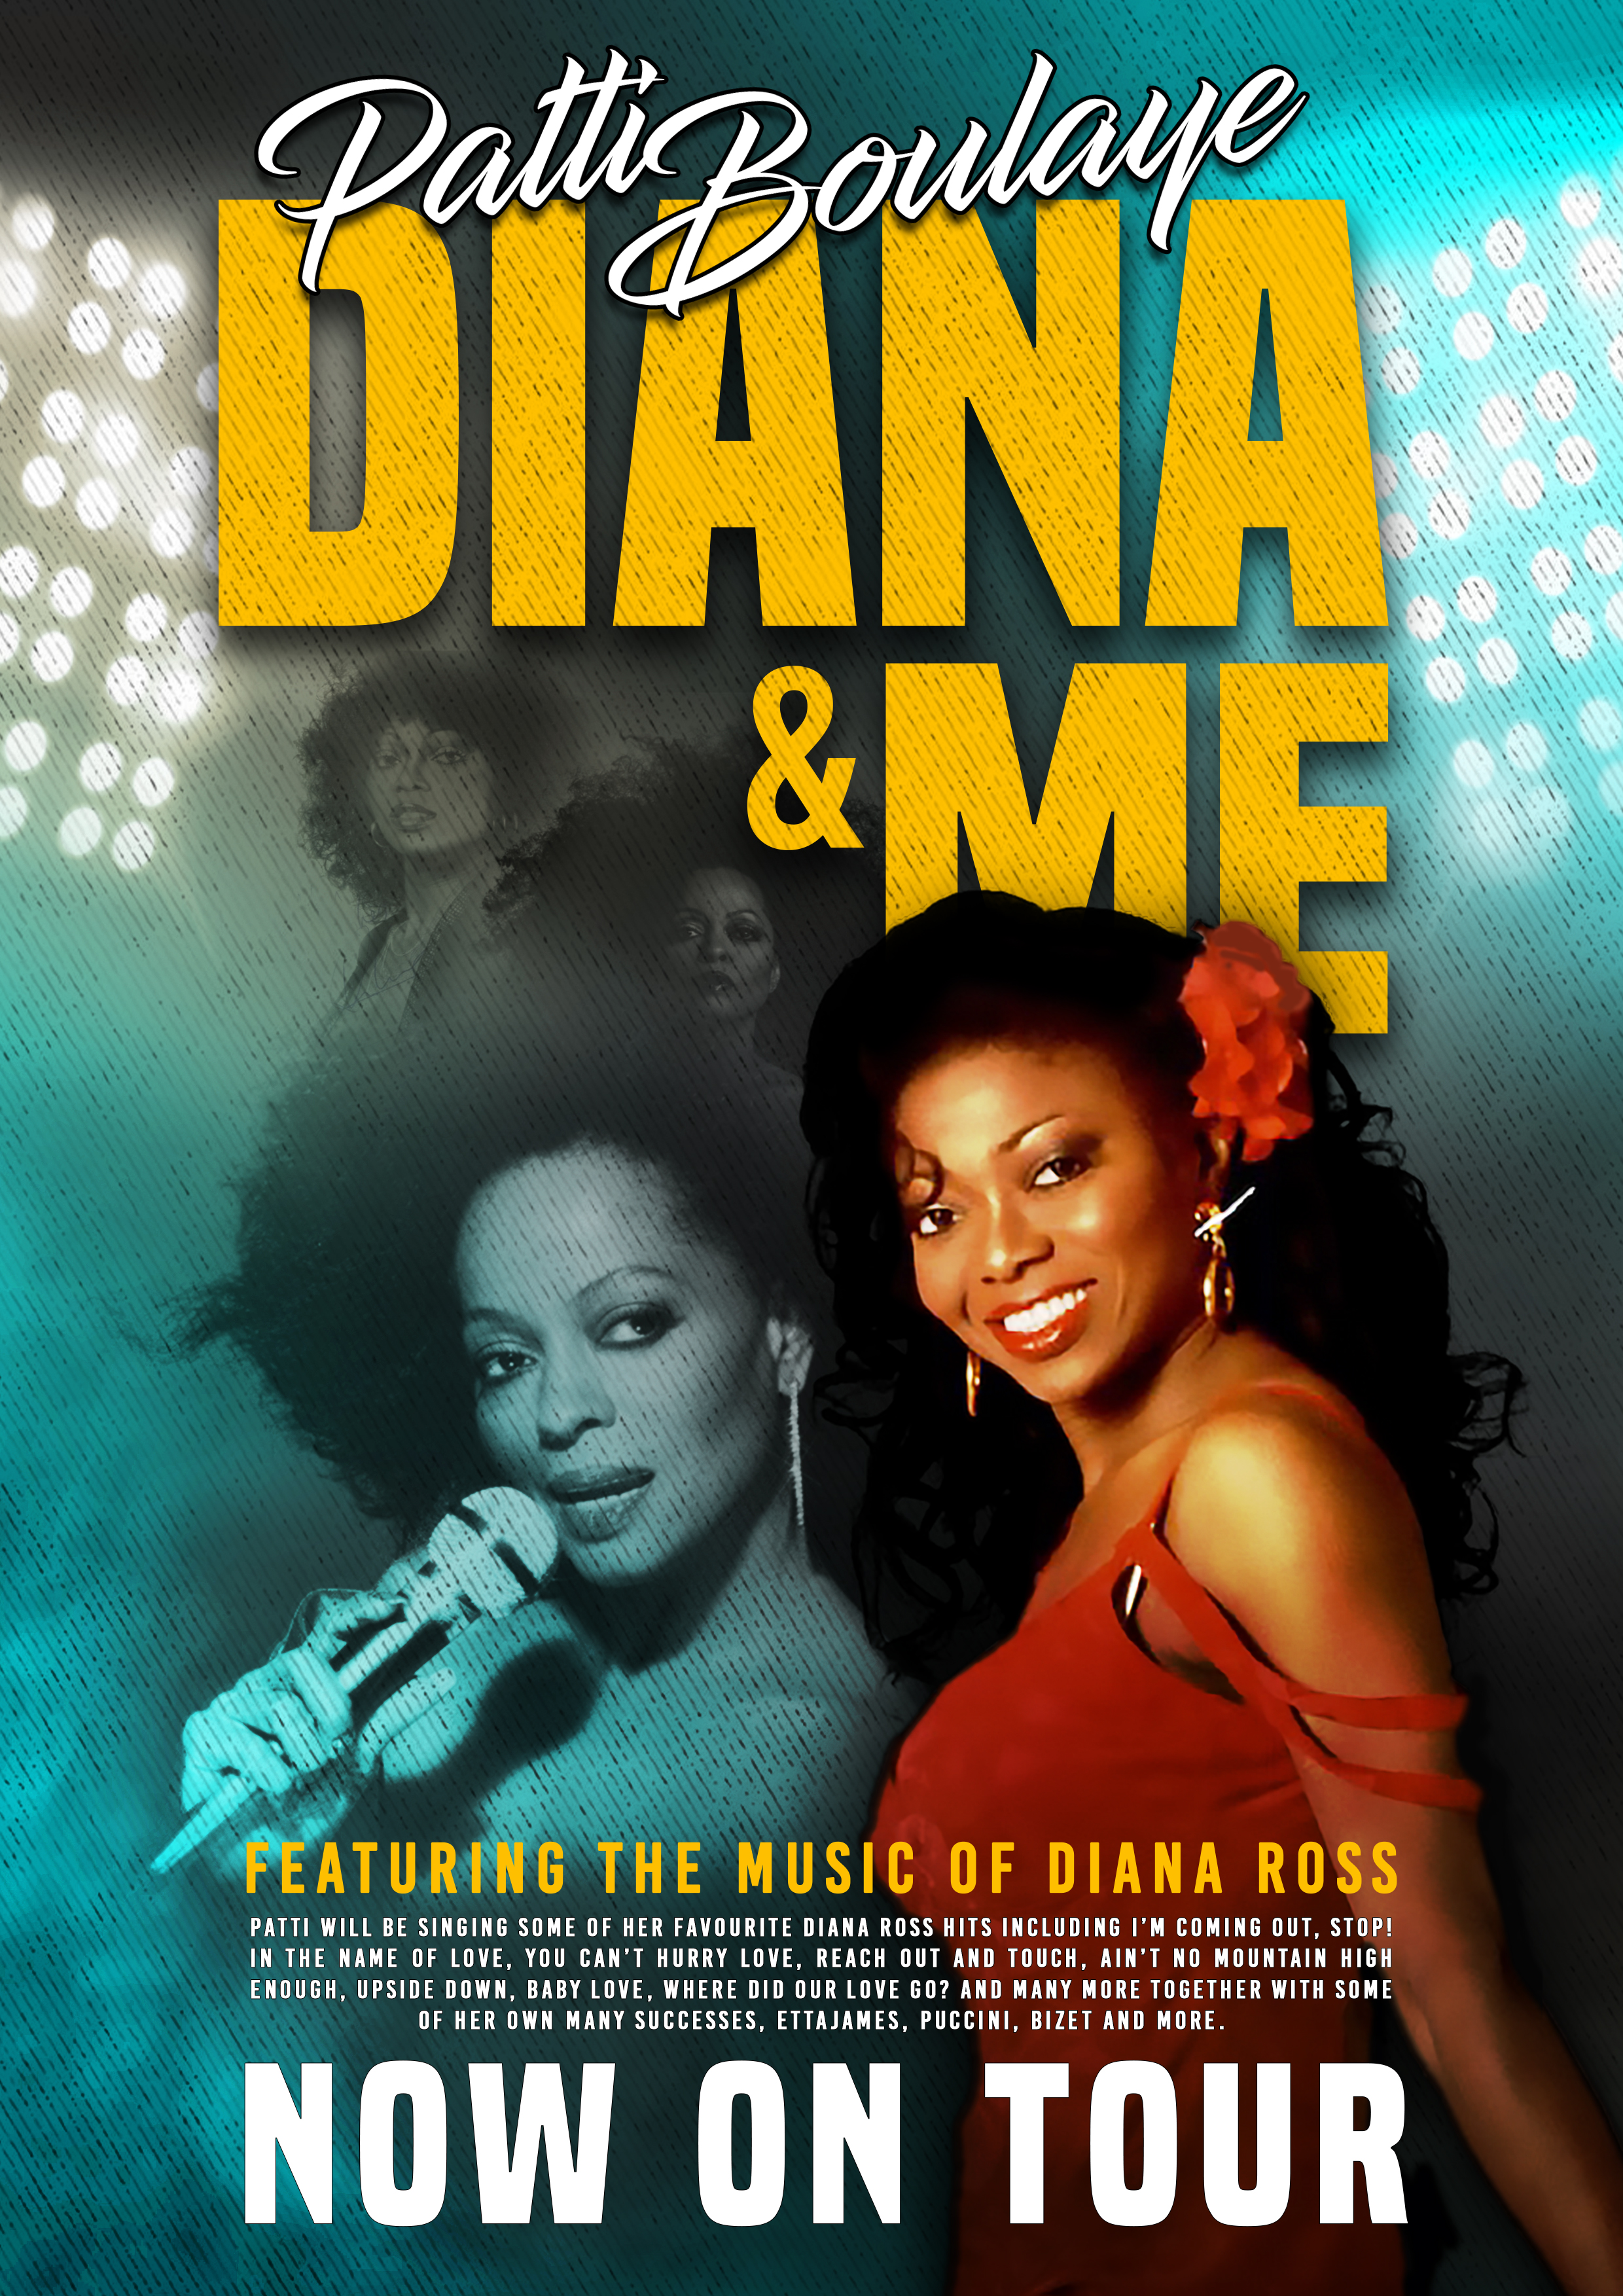 Image representing Patti Boulaye - Diana & Me - A one woman show featuring songs from the legendary soul diva from The Astor Theatre